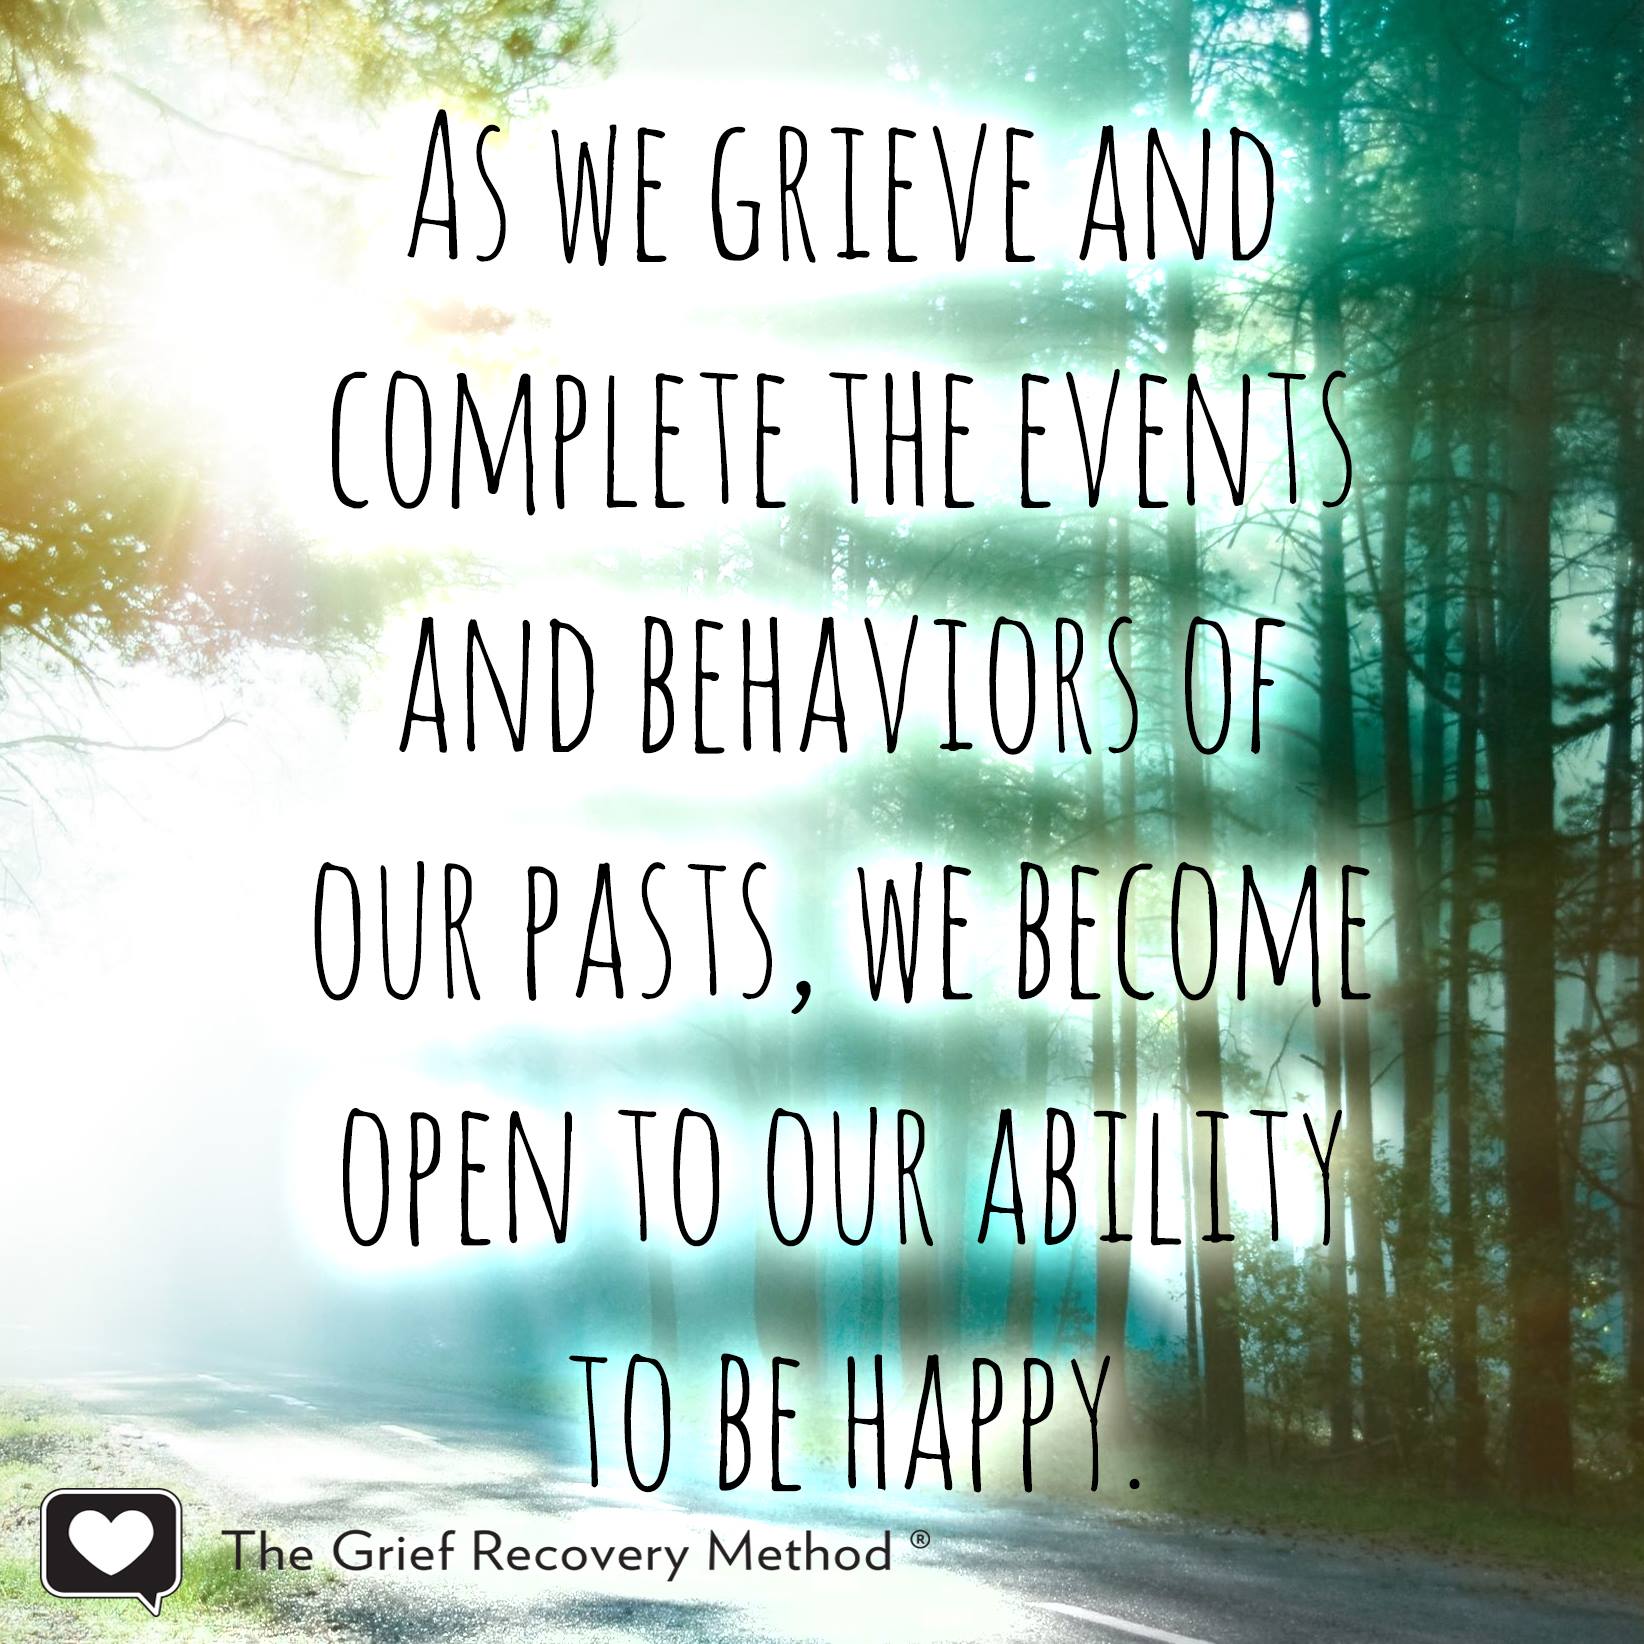 grieve complete behavior event past open ability to be happy